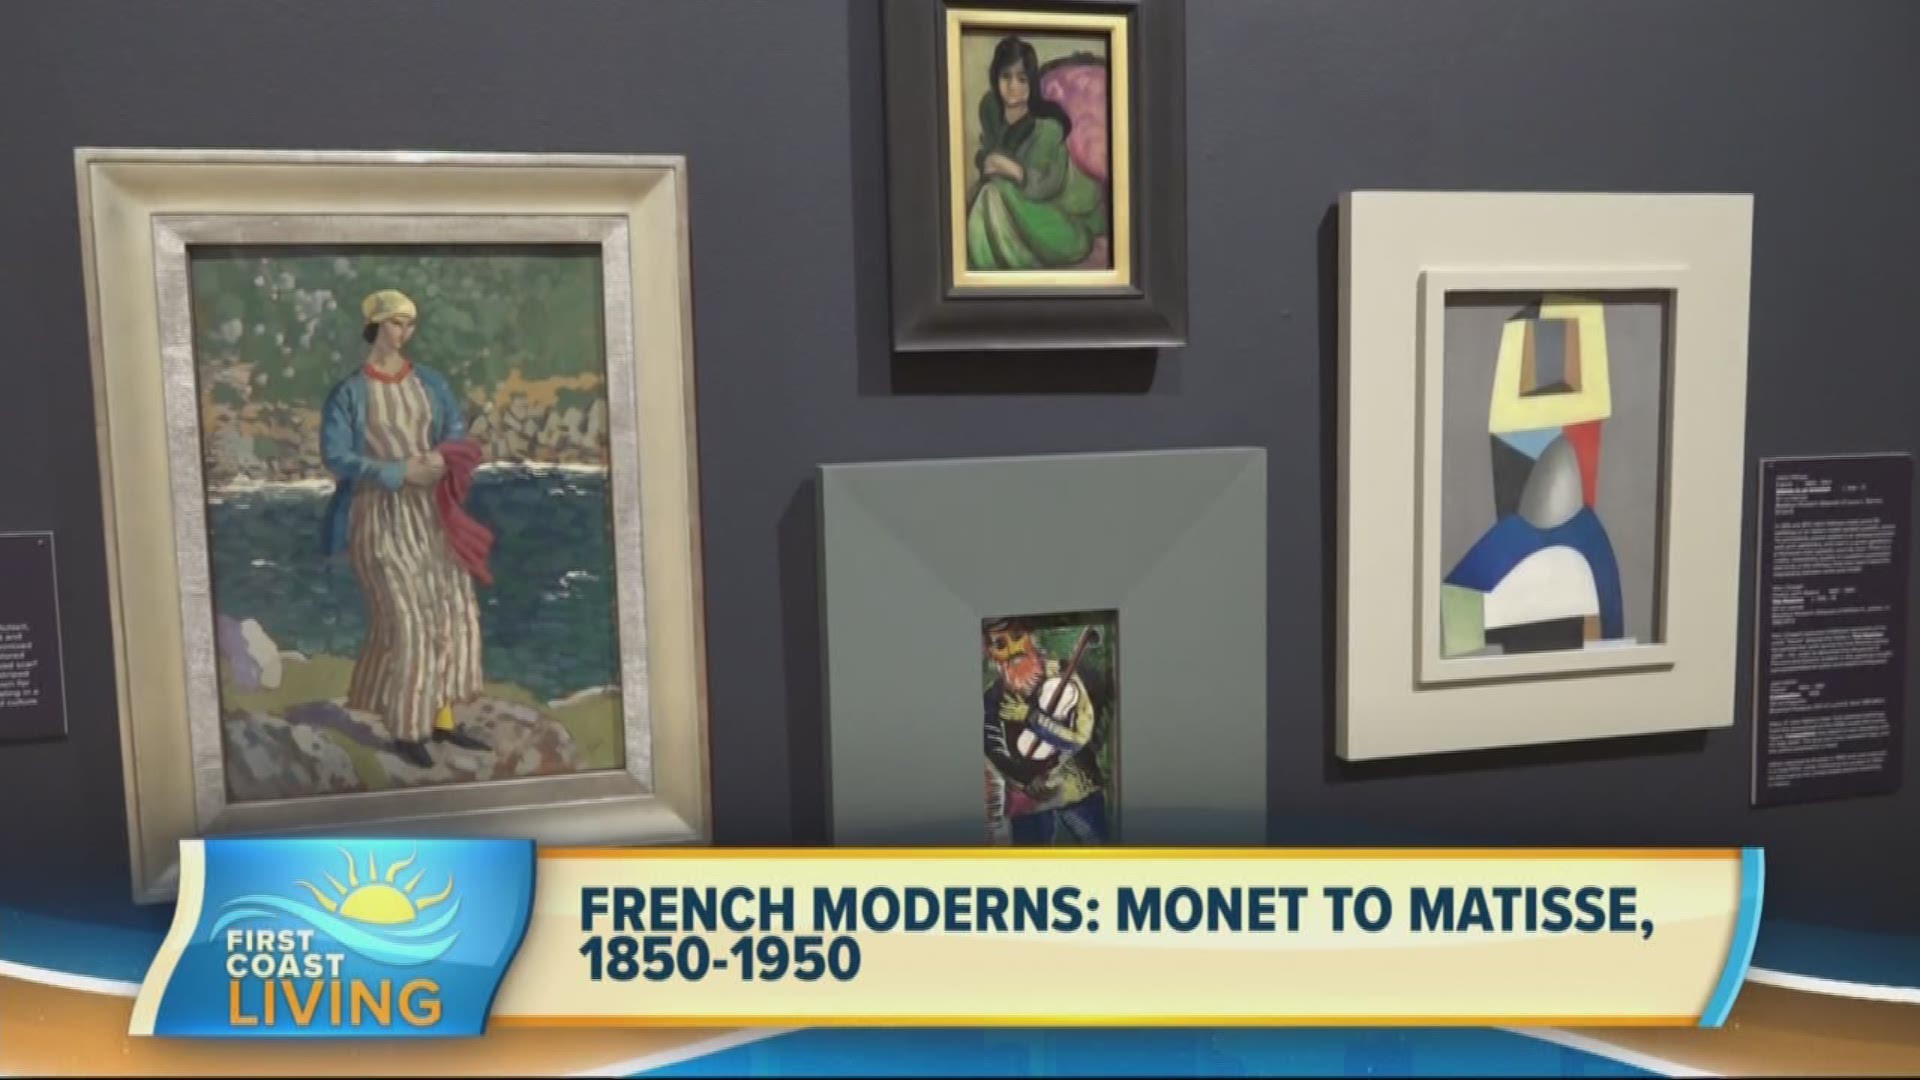 Travel both back in time and to France all through a canvas and other artworks at the French Moderns: Monet to Matisse, 1850-1950 exhibit at the Cummer Museum of Art & Garden.